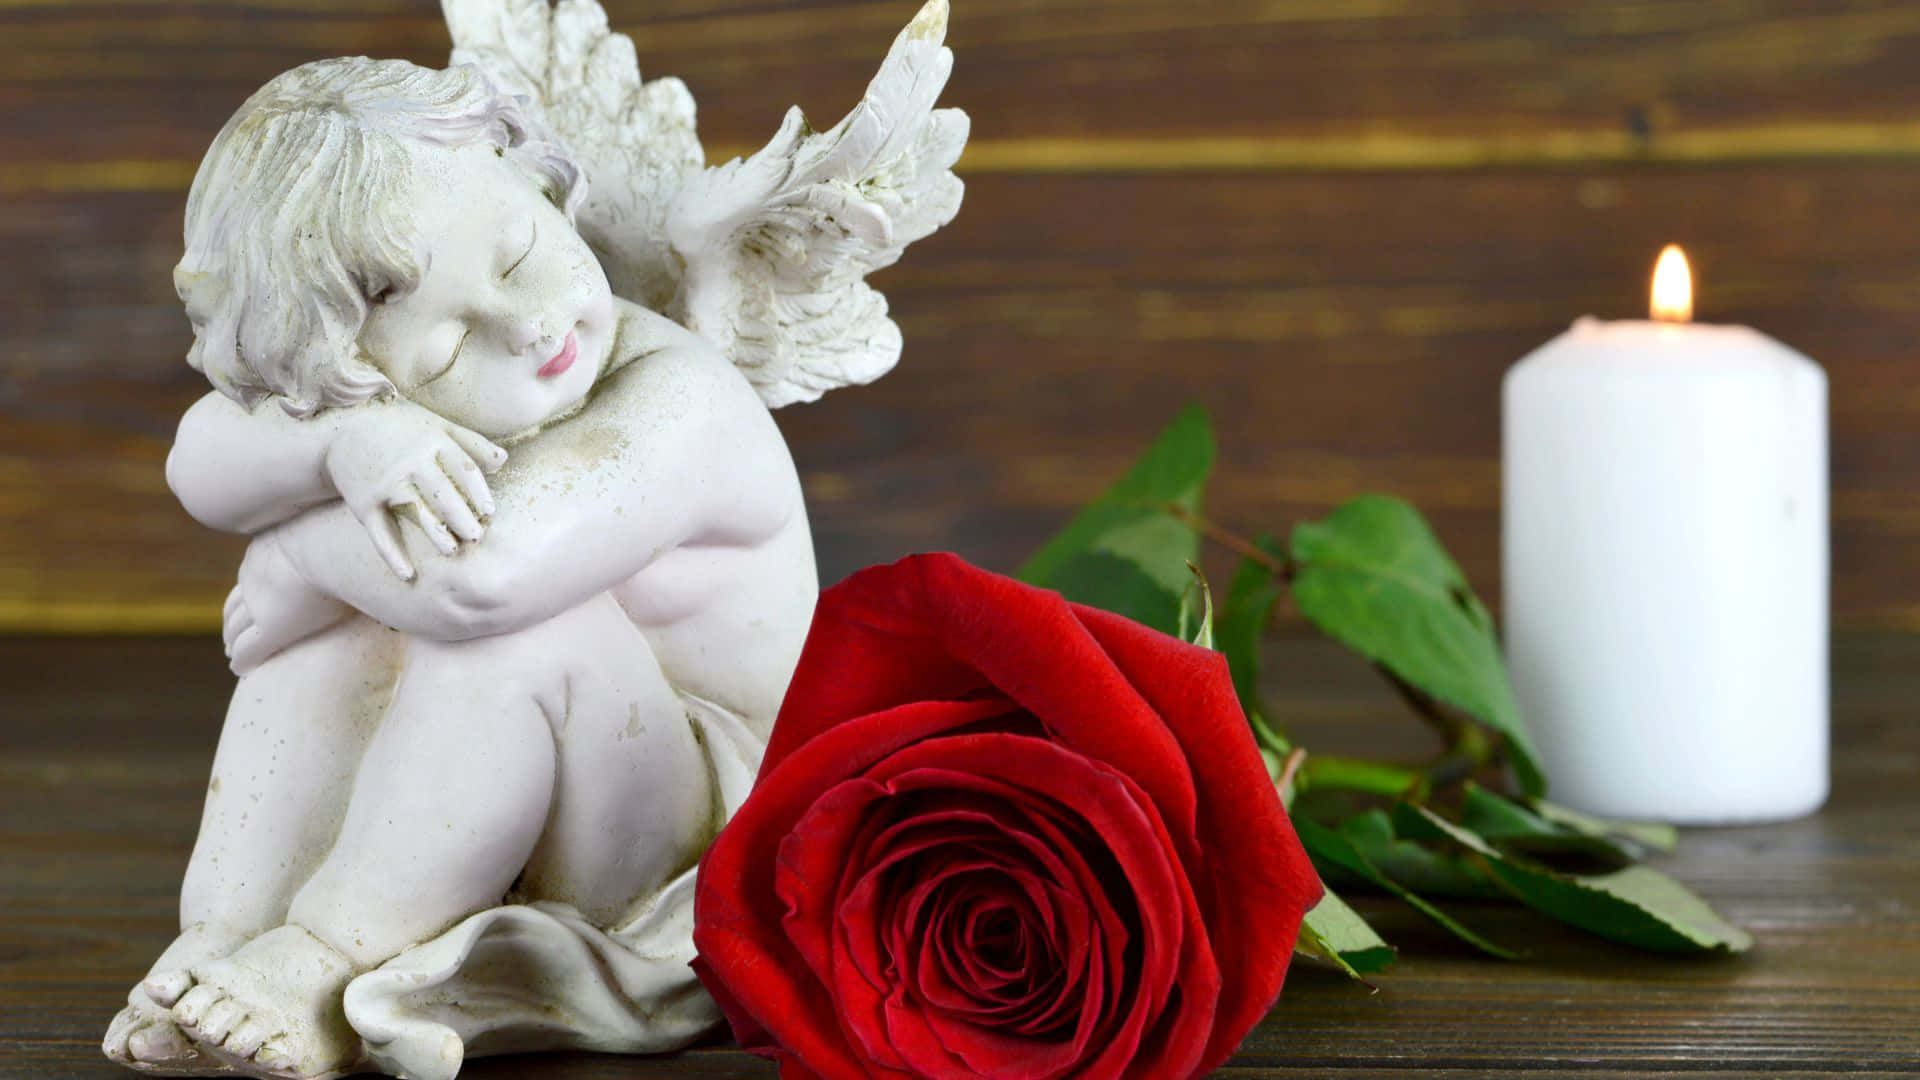 A Statue Of An Angel With A Red Rose